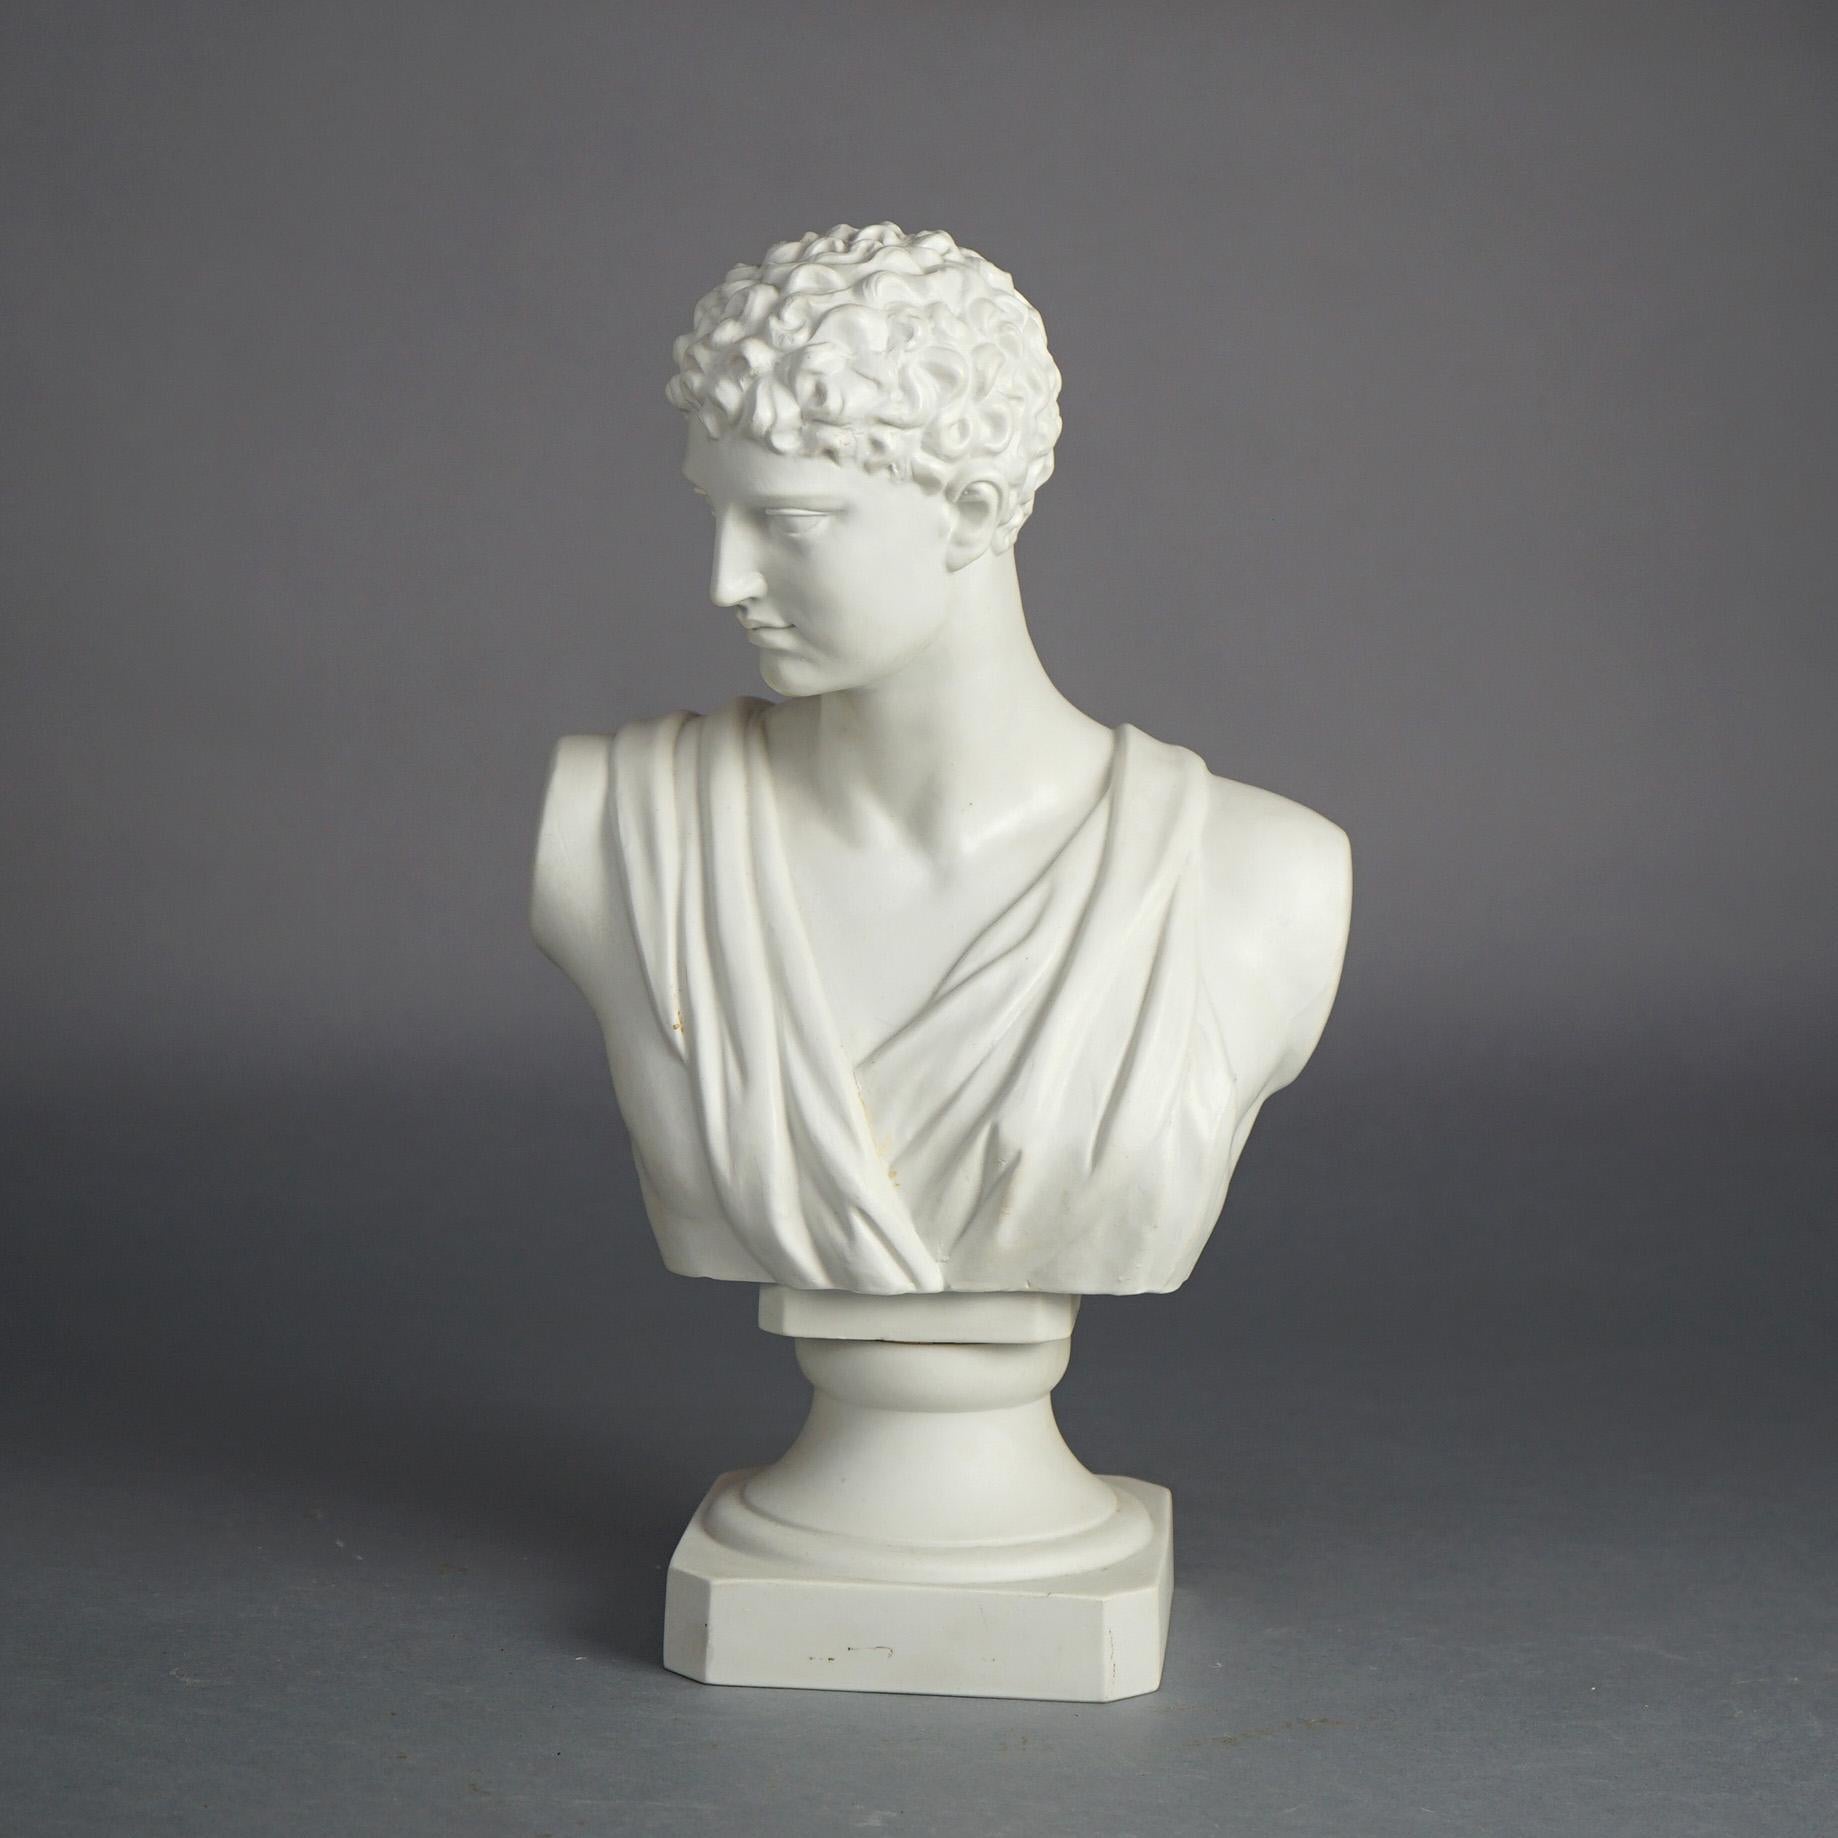 20th Century Antique French Neoclassical Parian Porcelain Bust of Michaelangelo's David C1900